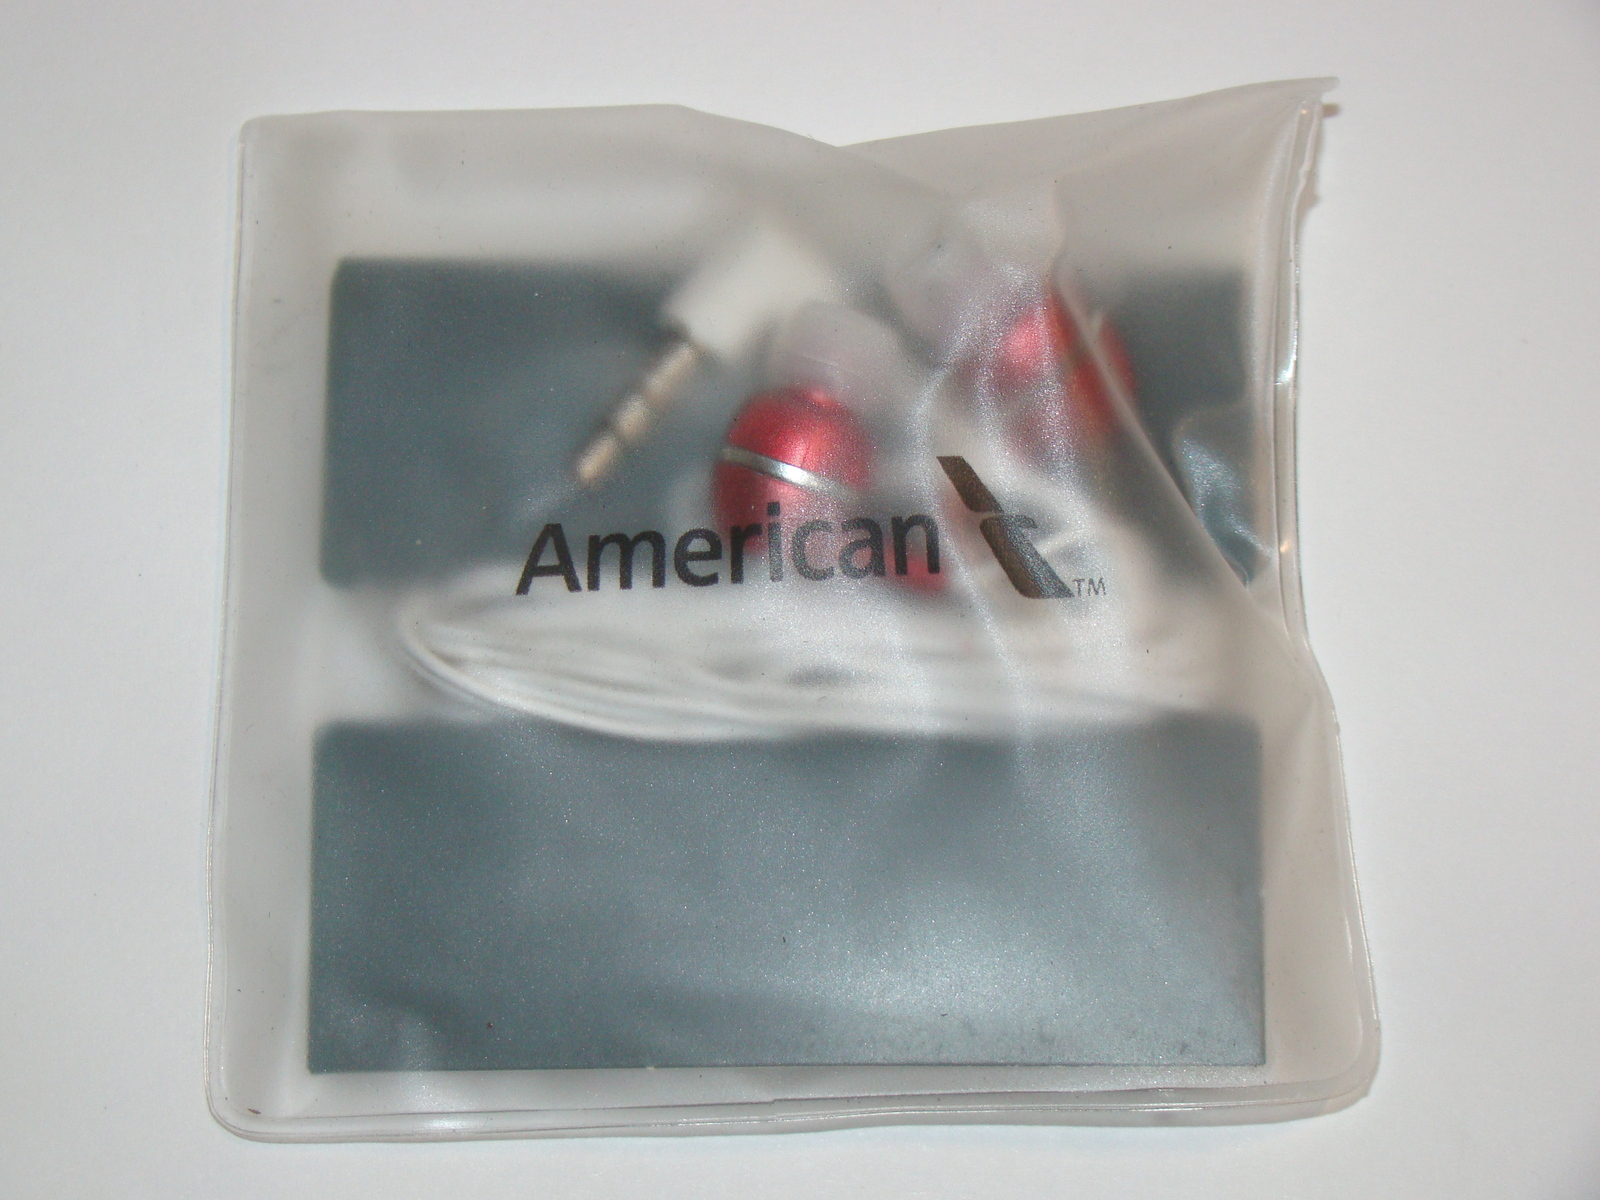 Airline Collectibles - American Airlines - In Flight Headphones - $12.00